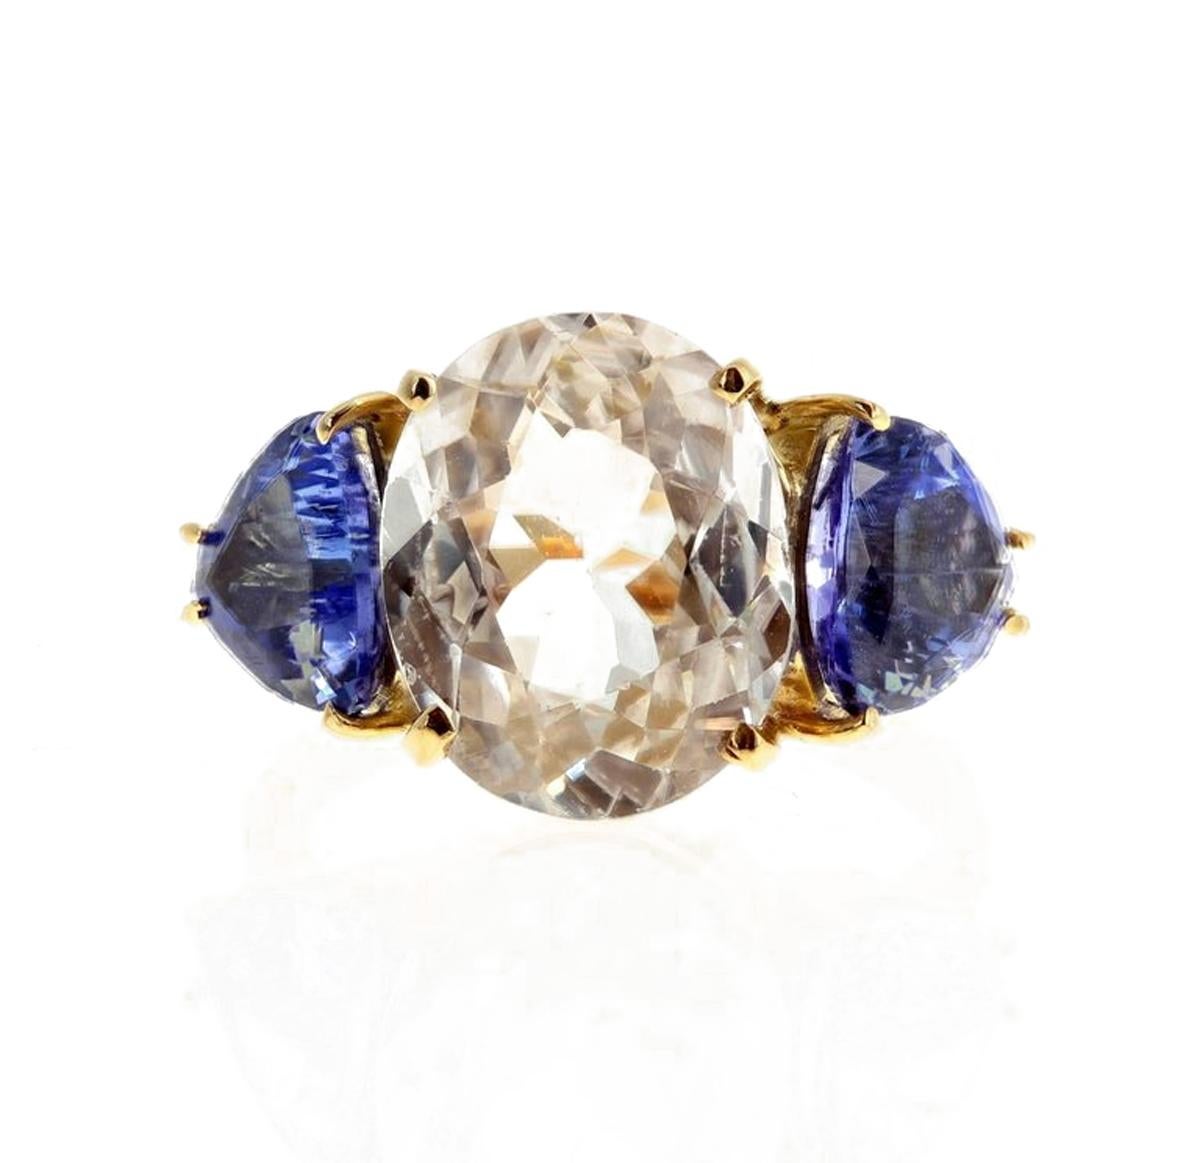 Glittering brilliant white natural real 5 carat Cambodian Zircon (12.2 mm x 9.6 mm) enhanced with sparkling natural blue Tanzanites (7 mm x 7.3 mm) set in a unique handmade 18Kt yellow gold ring size 5.5 (sizable for free). This gemstone is from the